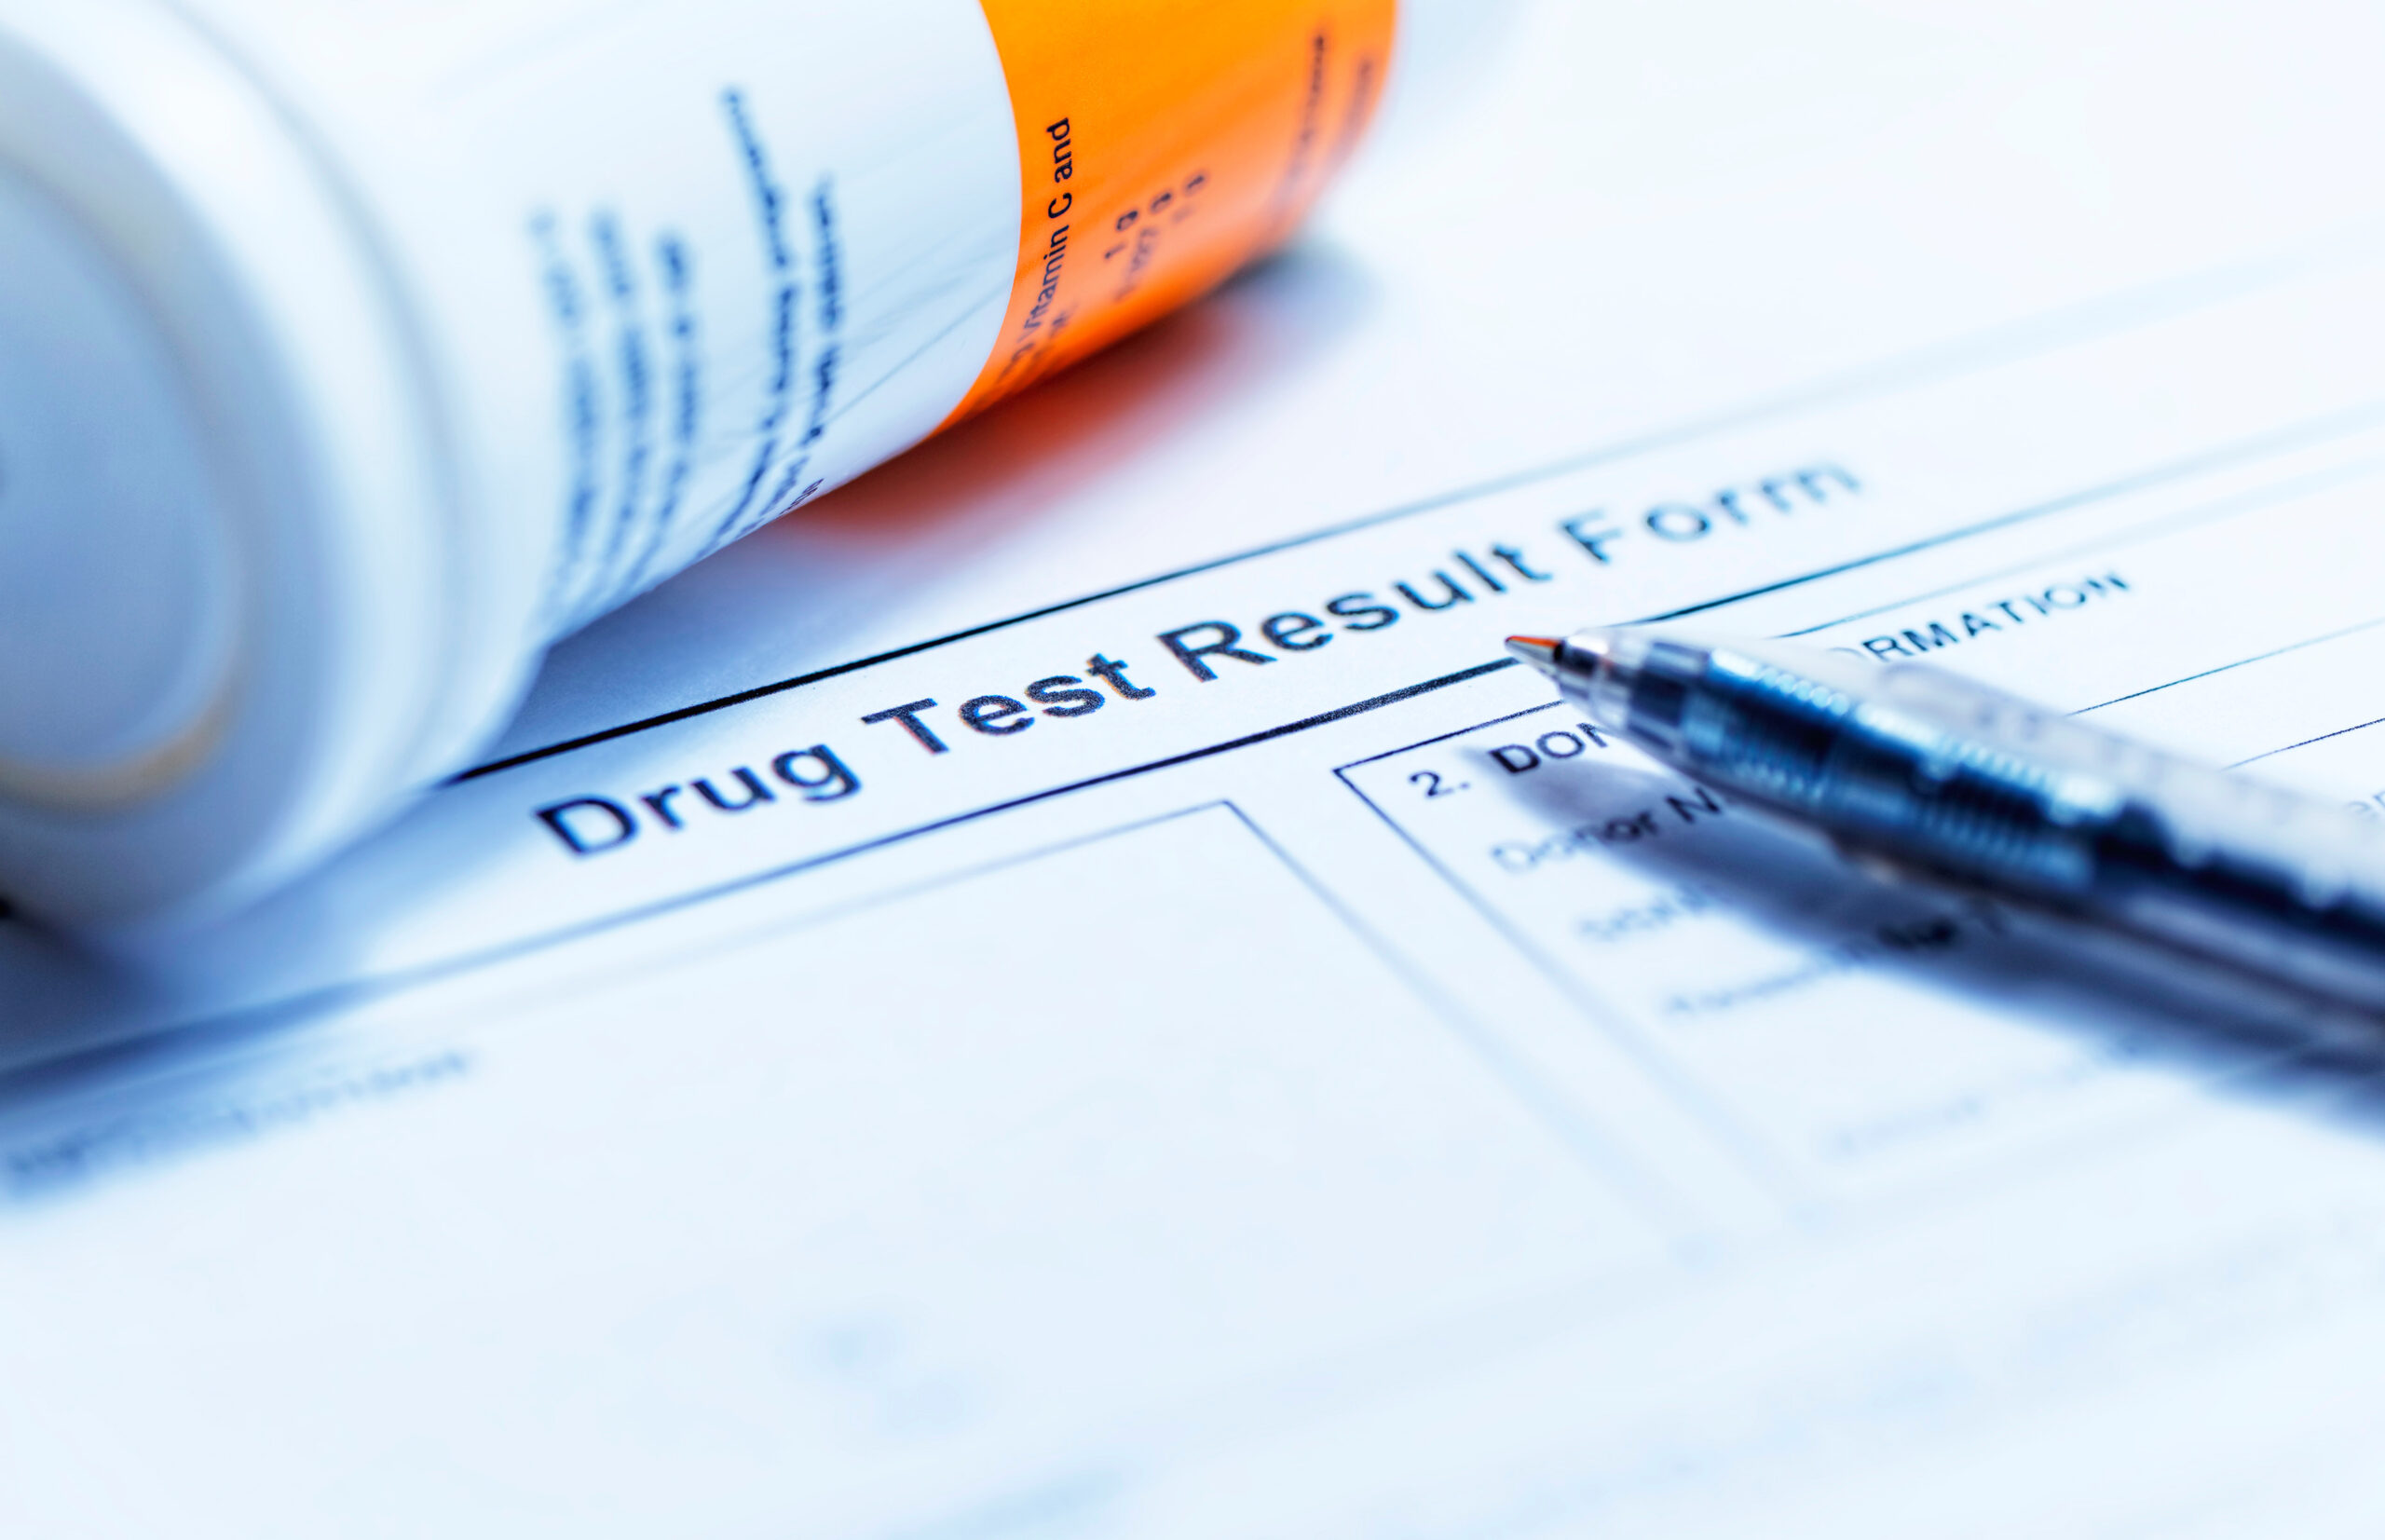 How Do I Book Follicle Drug Testing Services in Conroe, TX?